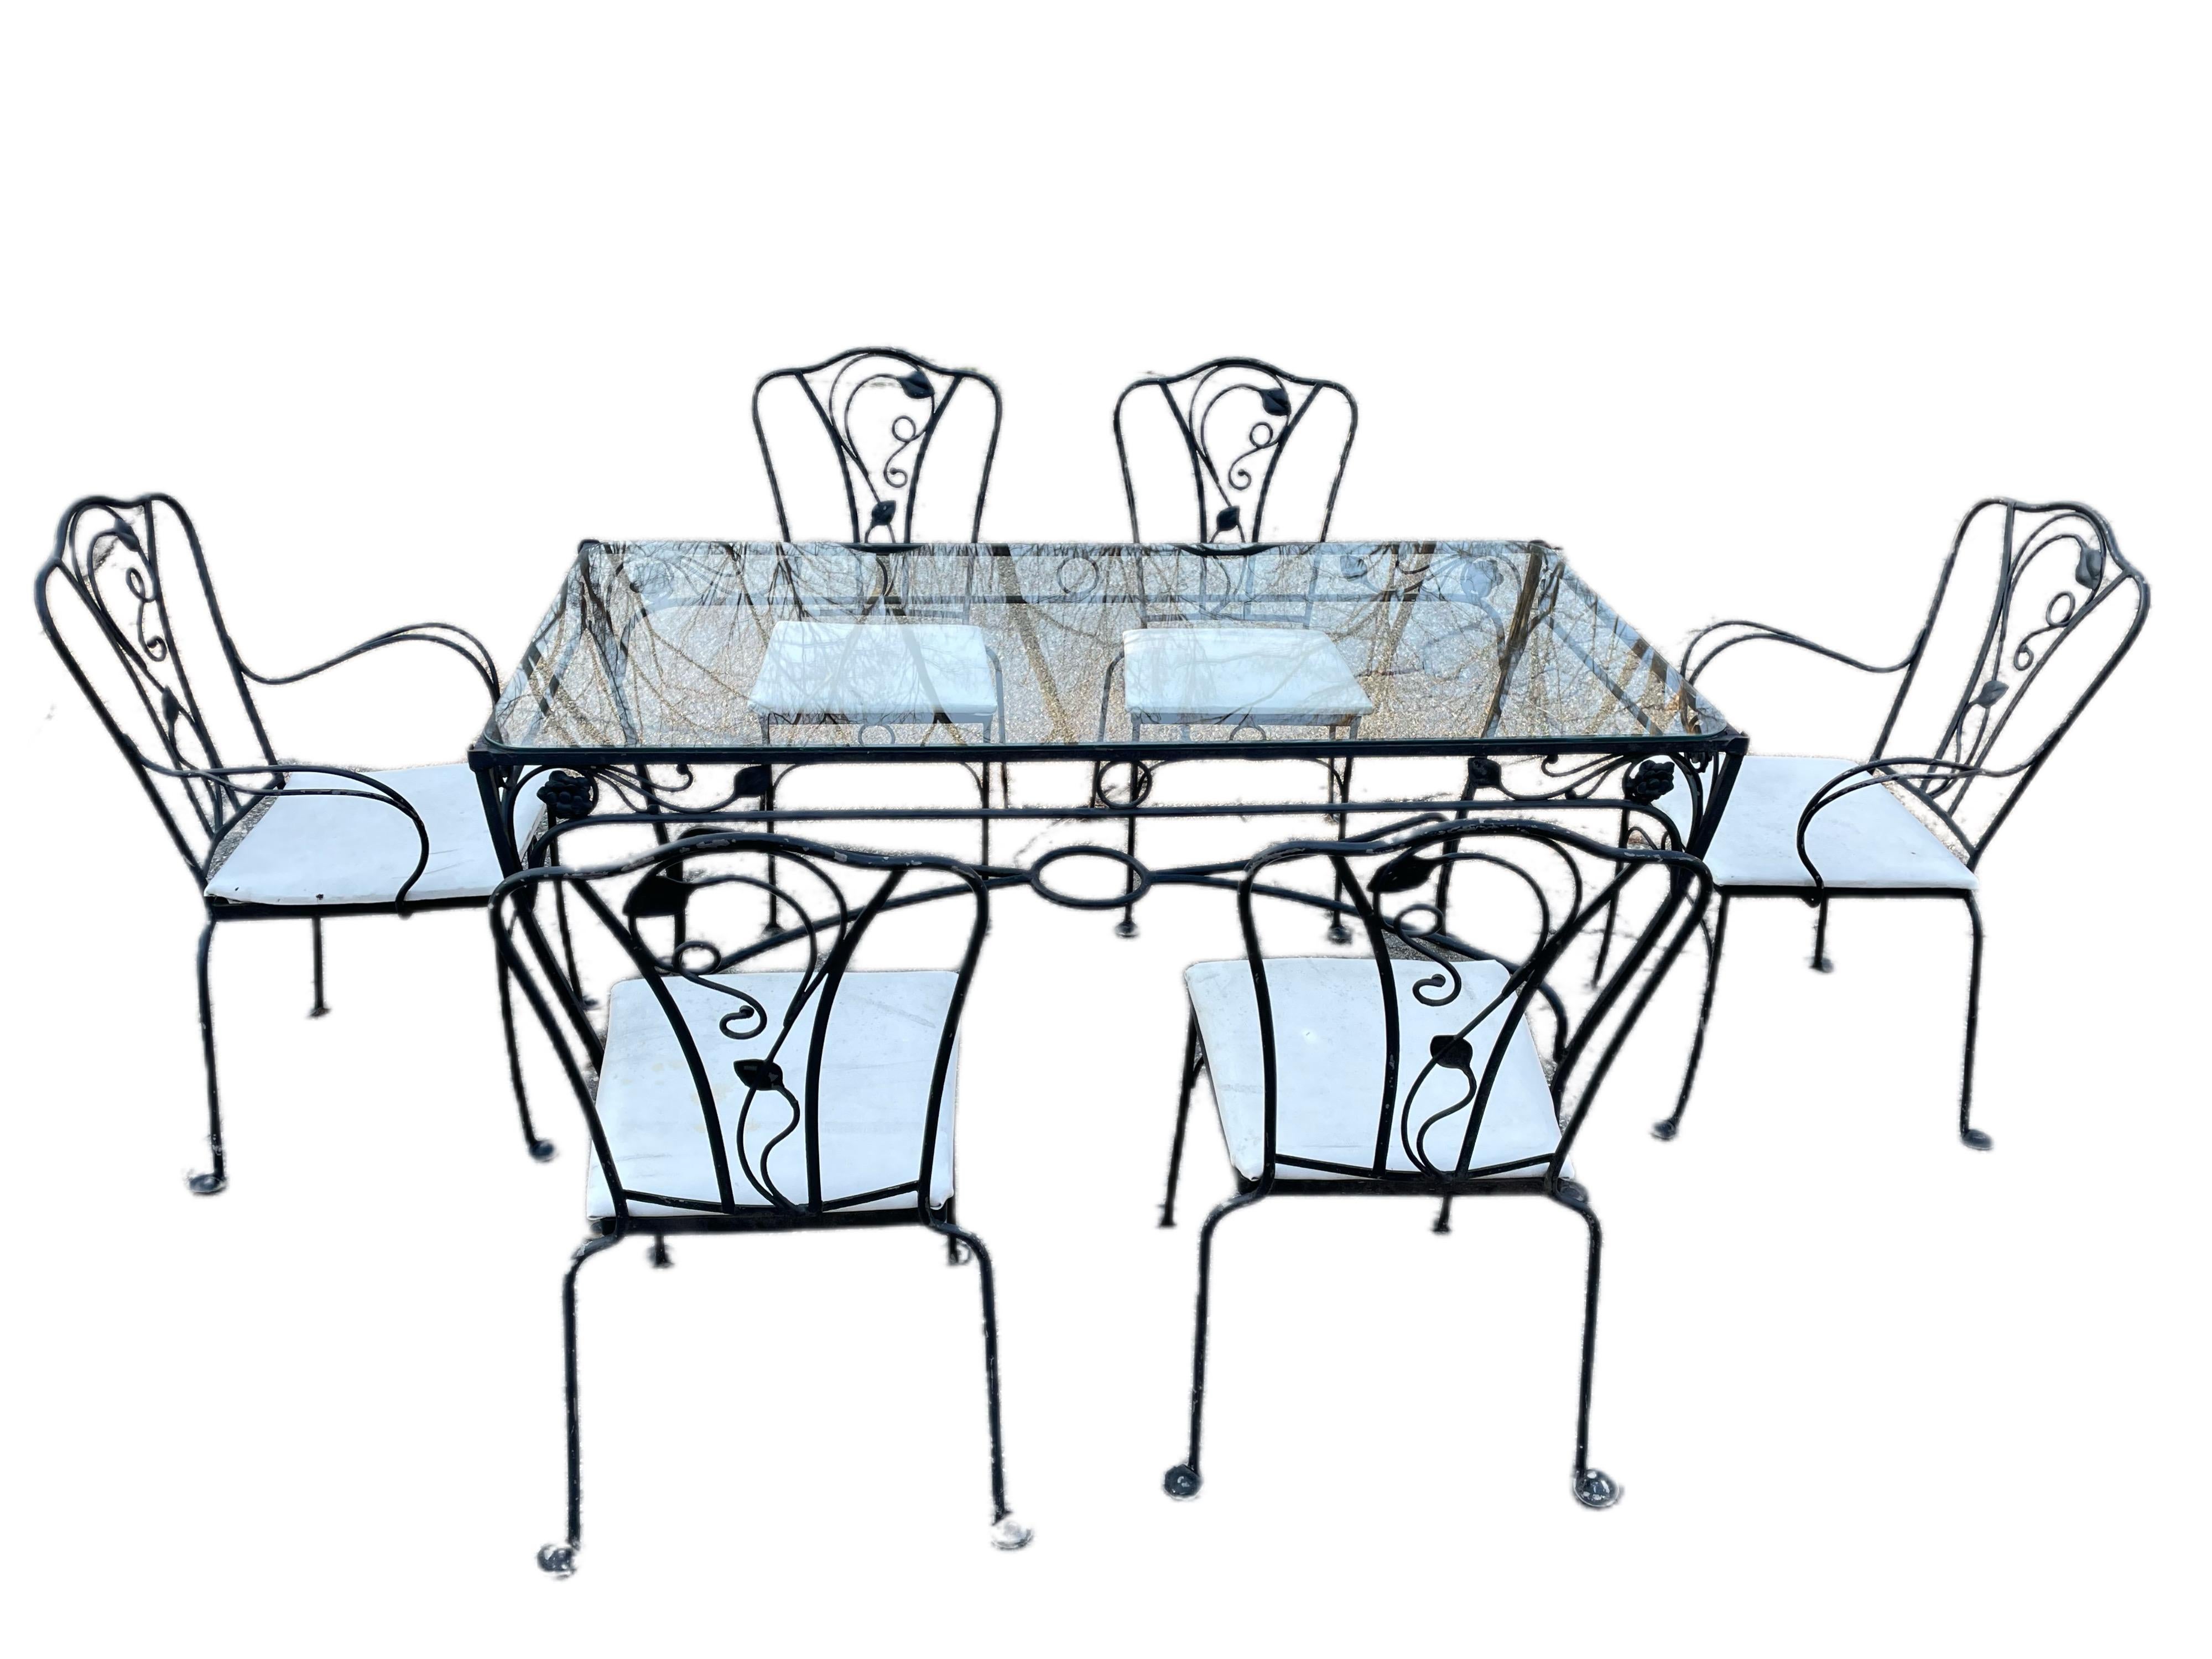 Salterini Dining Seating 7 Piece Set

Hard to find 60 inch table designed by Salterini. Seating for 6 people. Signature Salterini outward facing feet and floral motif. Enjoy this vintage wrought iron 7 piece dining set on your terrace, garden, or